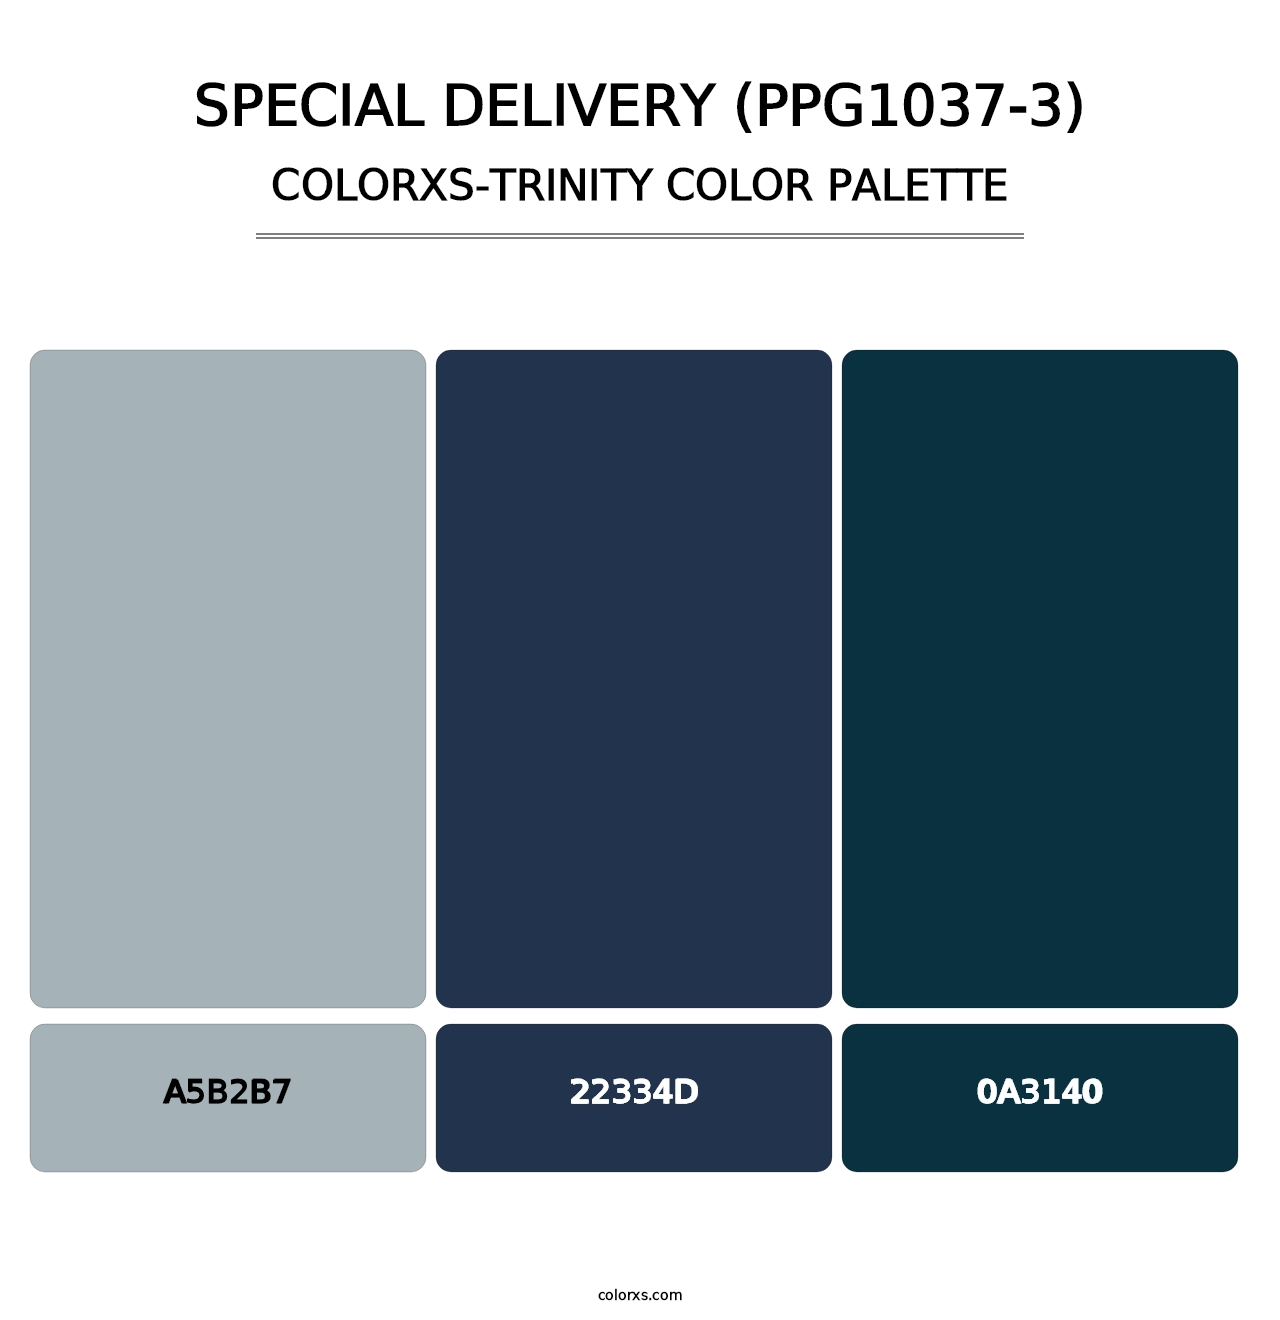 Special Delivery (PPG1037-3) - Colorxs Trinity Palette